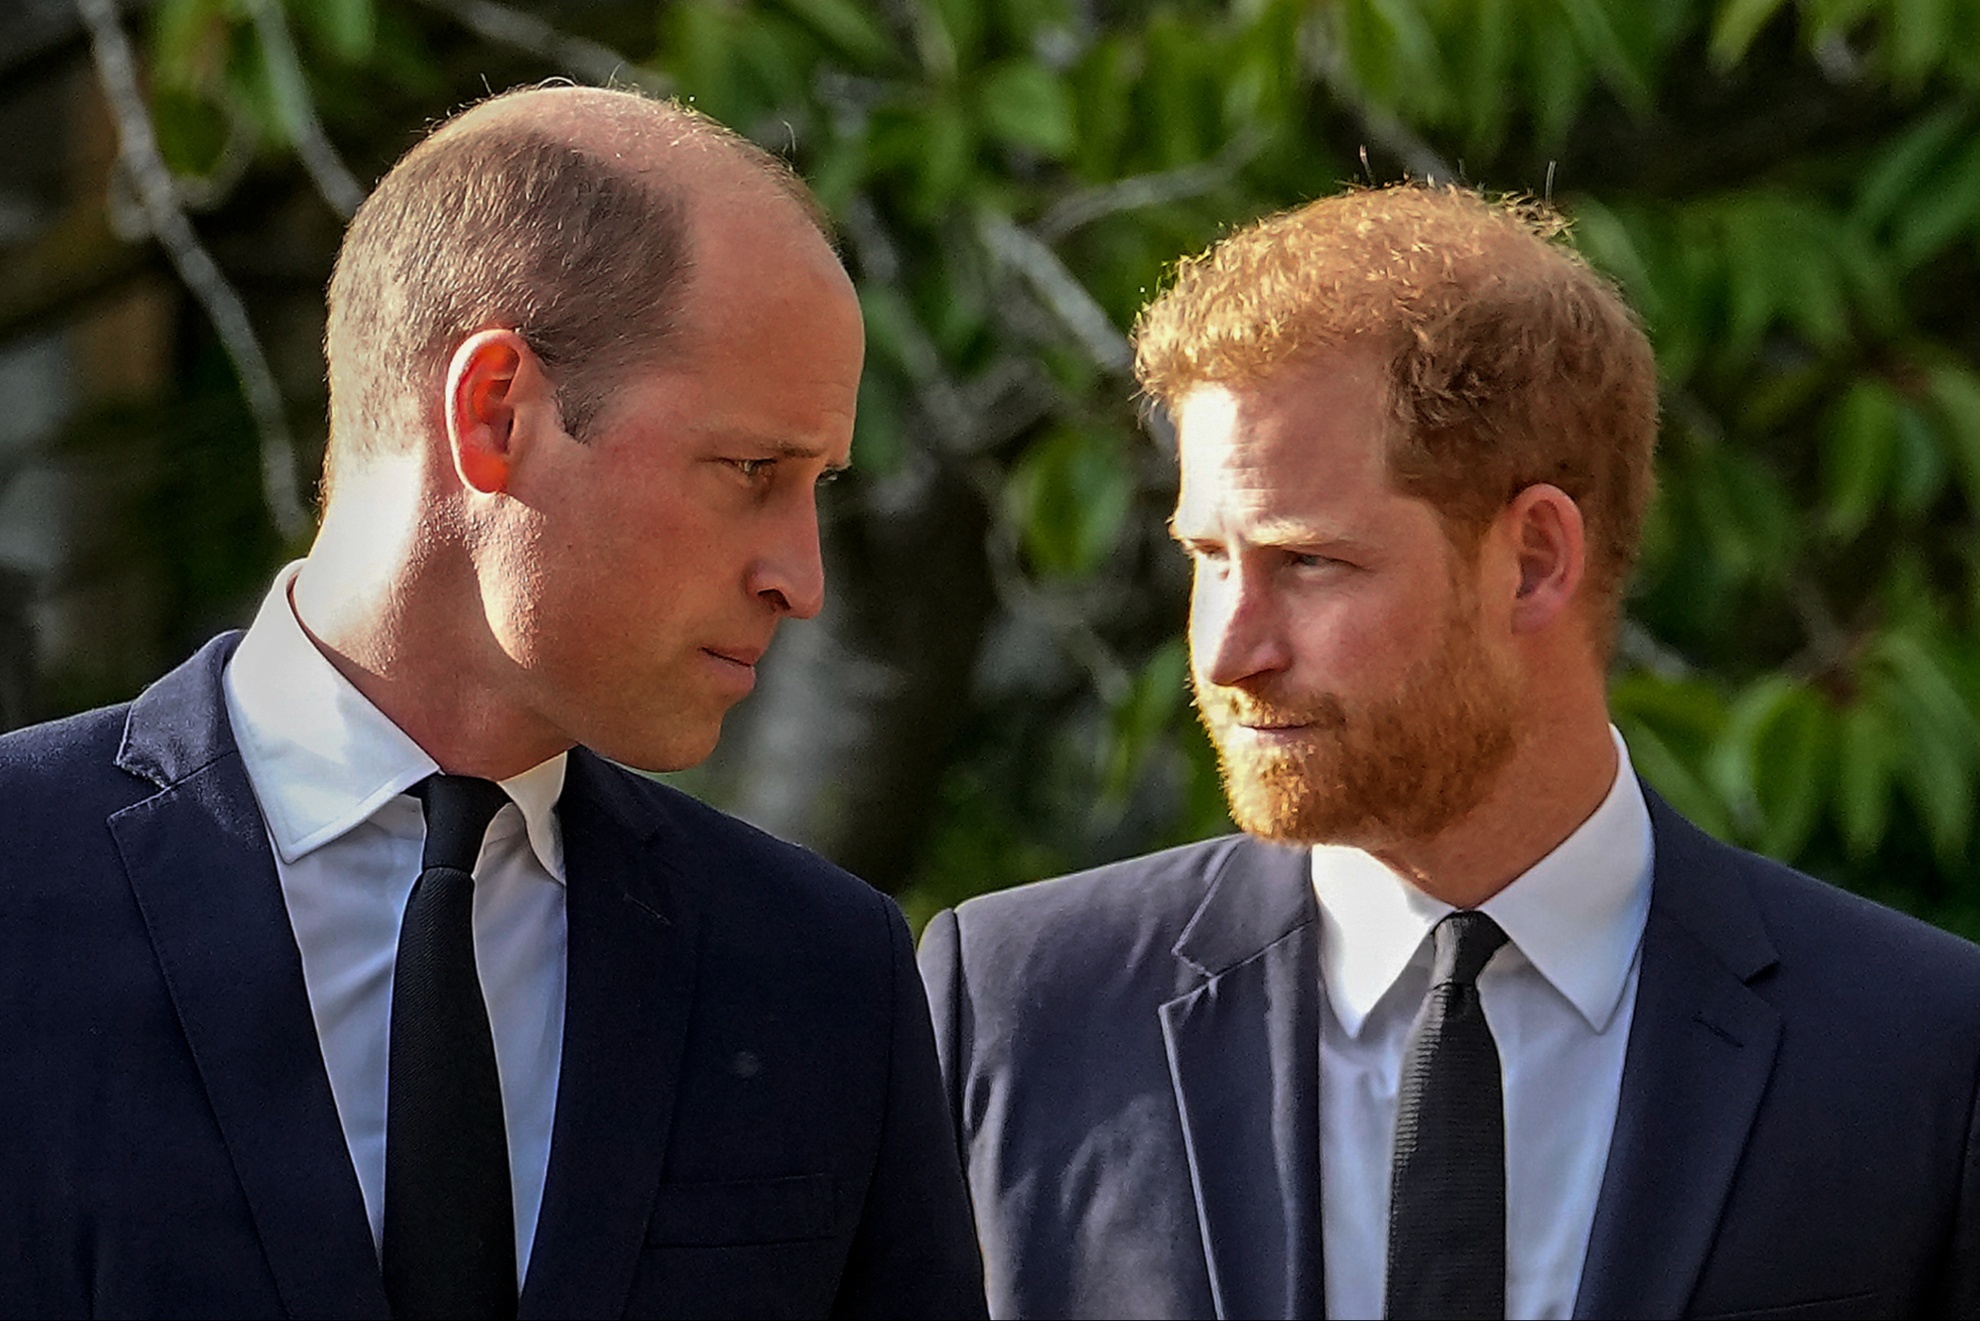 The Prince of Wales, Prince William, and the Duke of Sussex, Prince Harry.